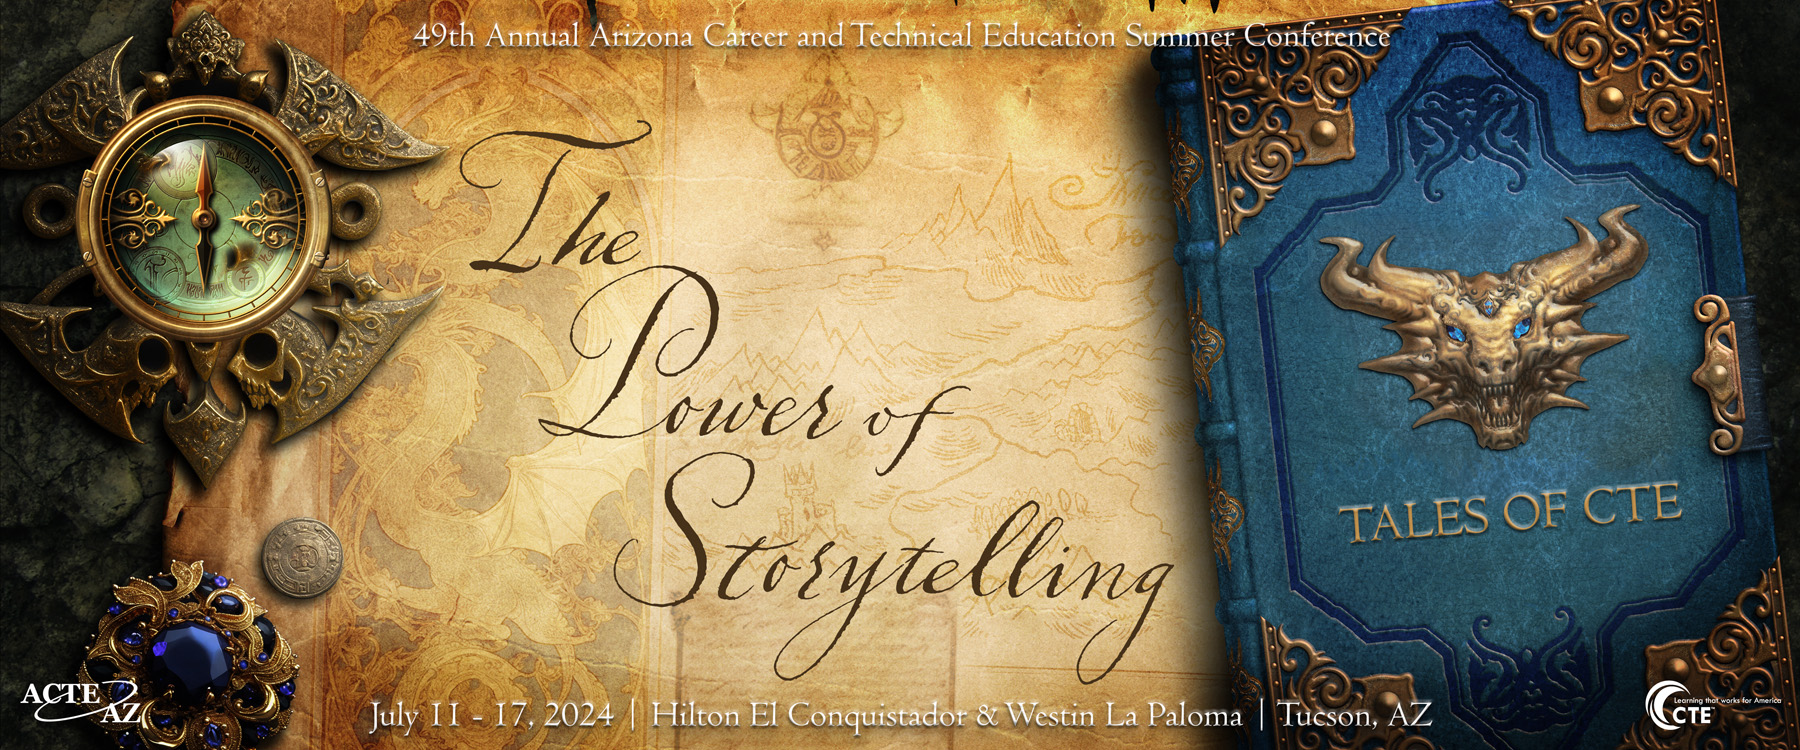 The power of storytelling | 49th Annual Arizona Career and Technical Education Summer Conference | July 11-17, 2024